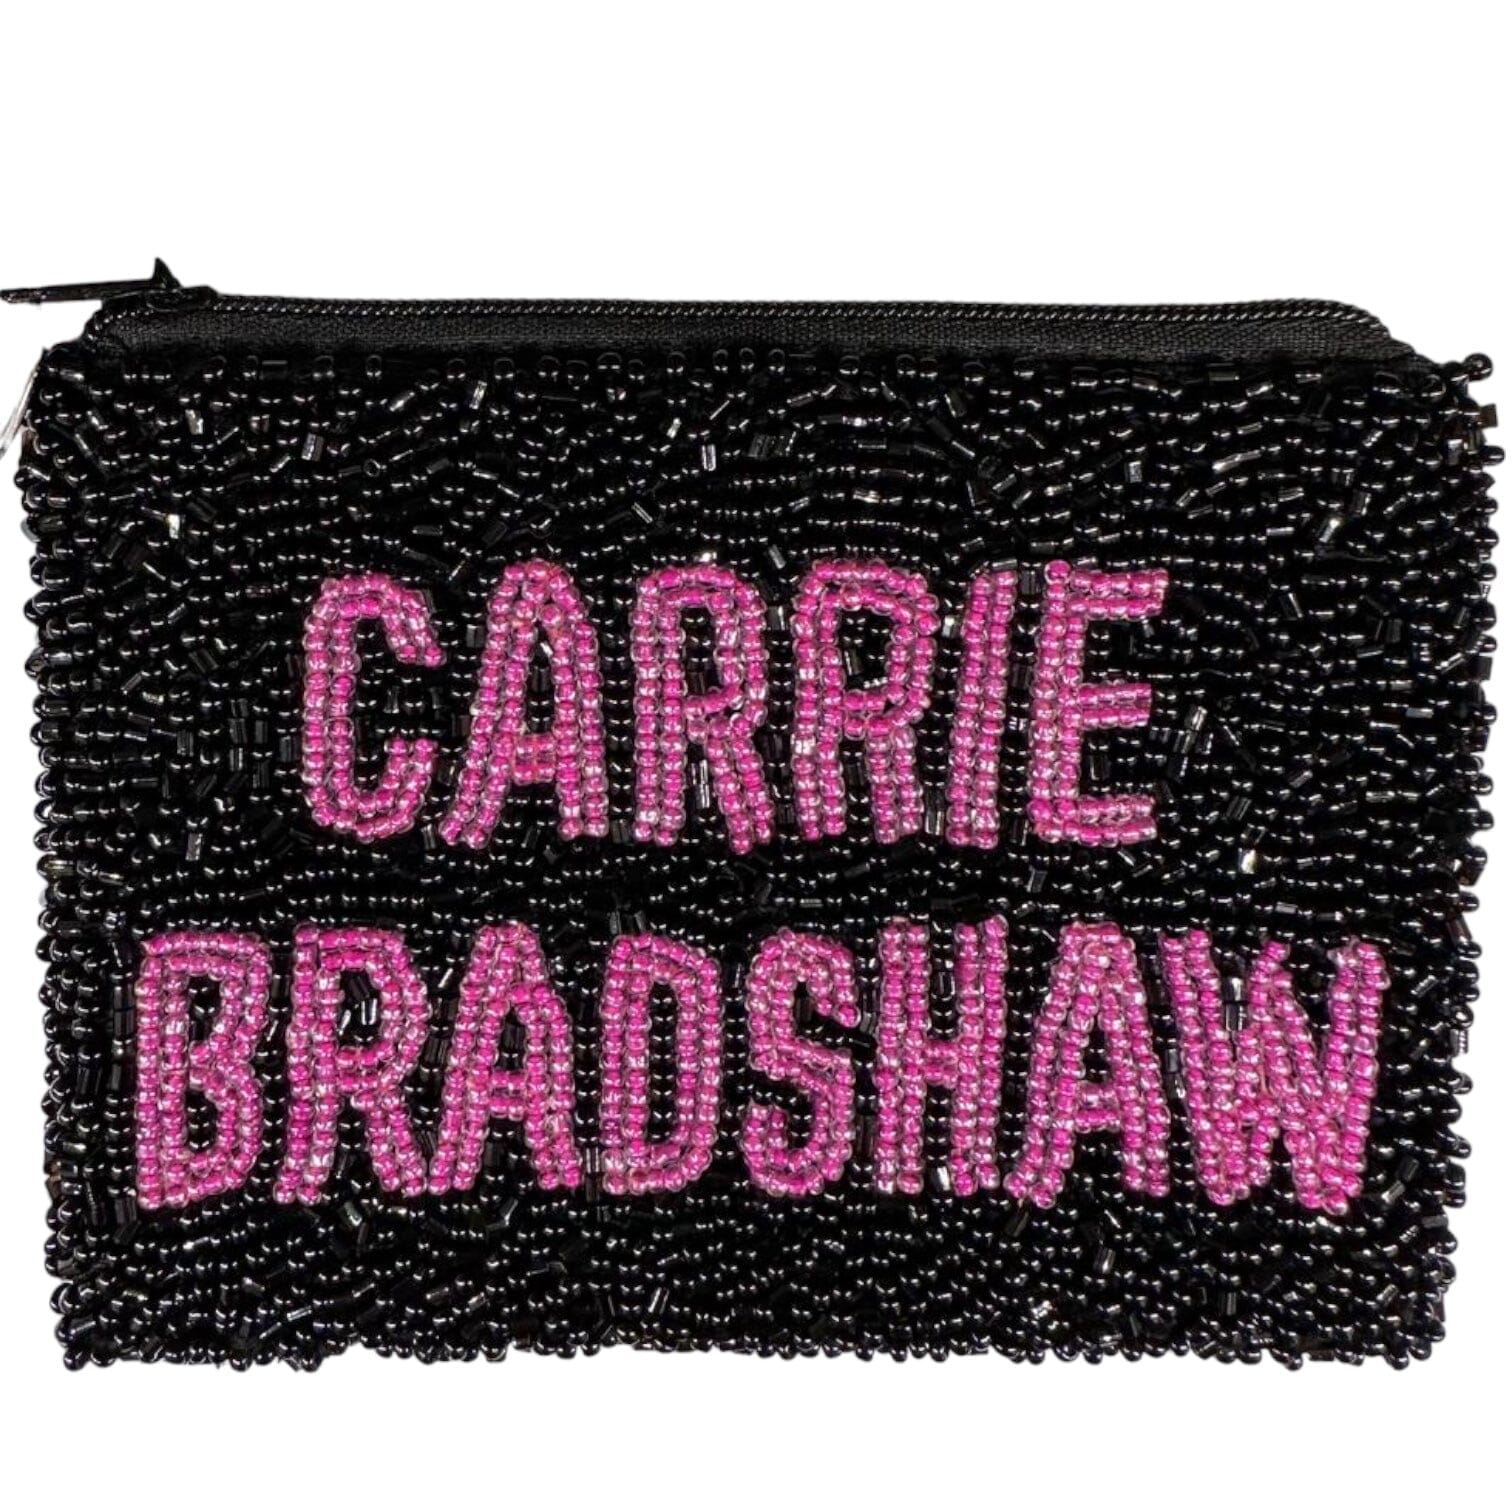 Was Carrie Bradshaw a Wise Fashion Investor? The Verdict Is Yes | Vogue